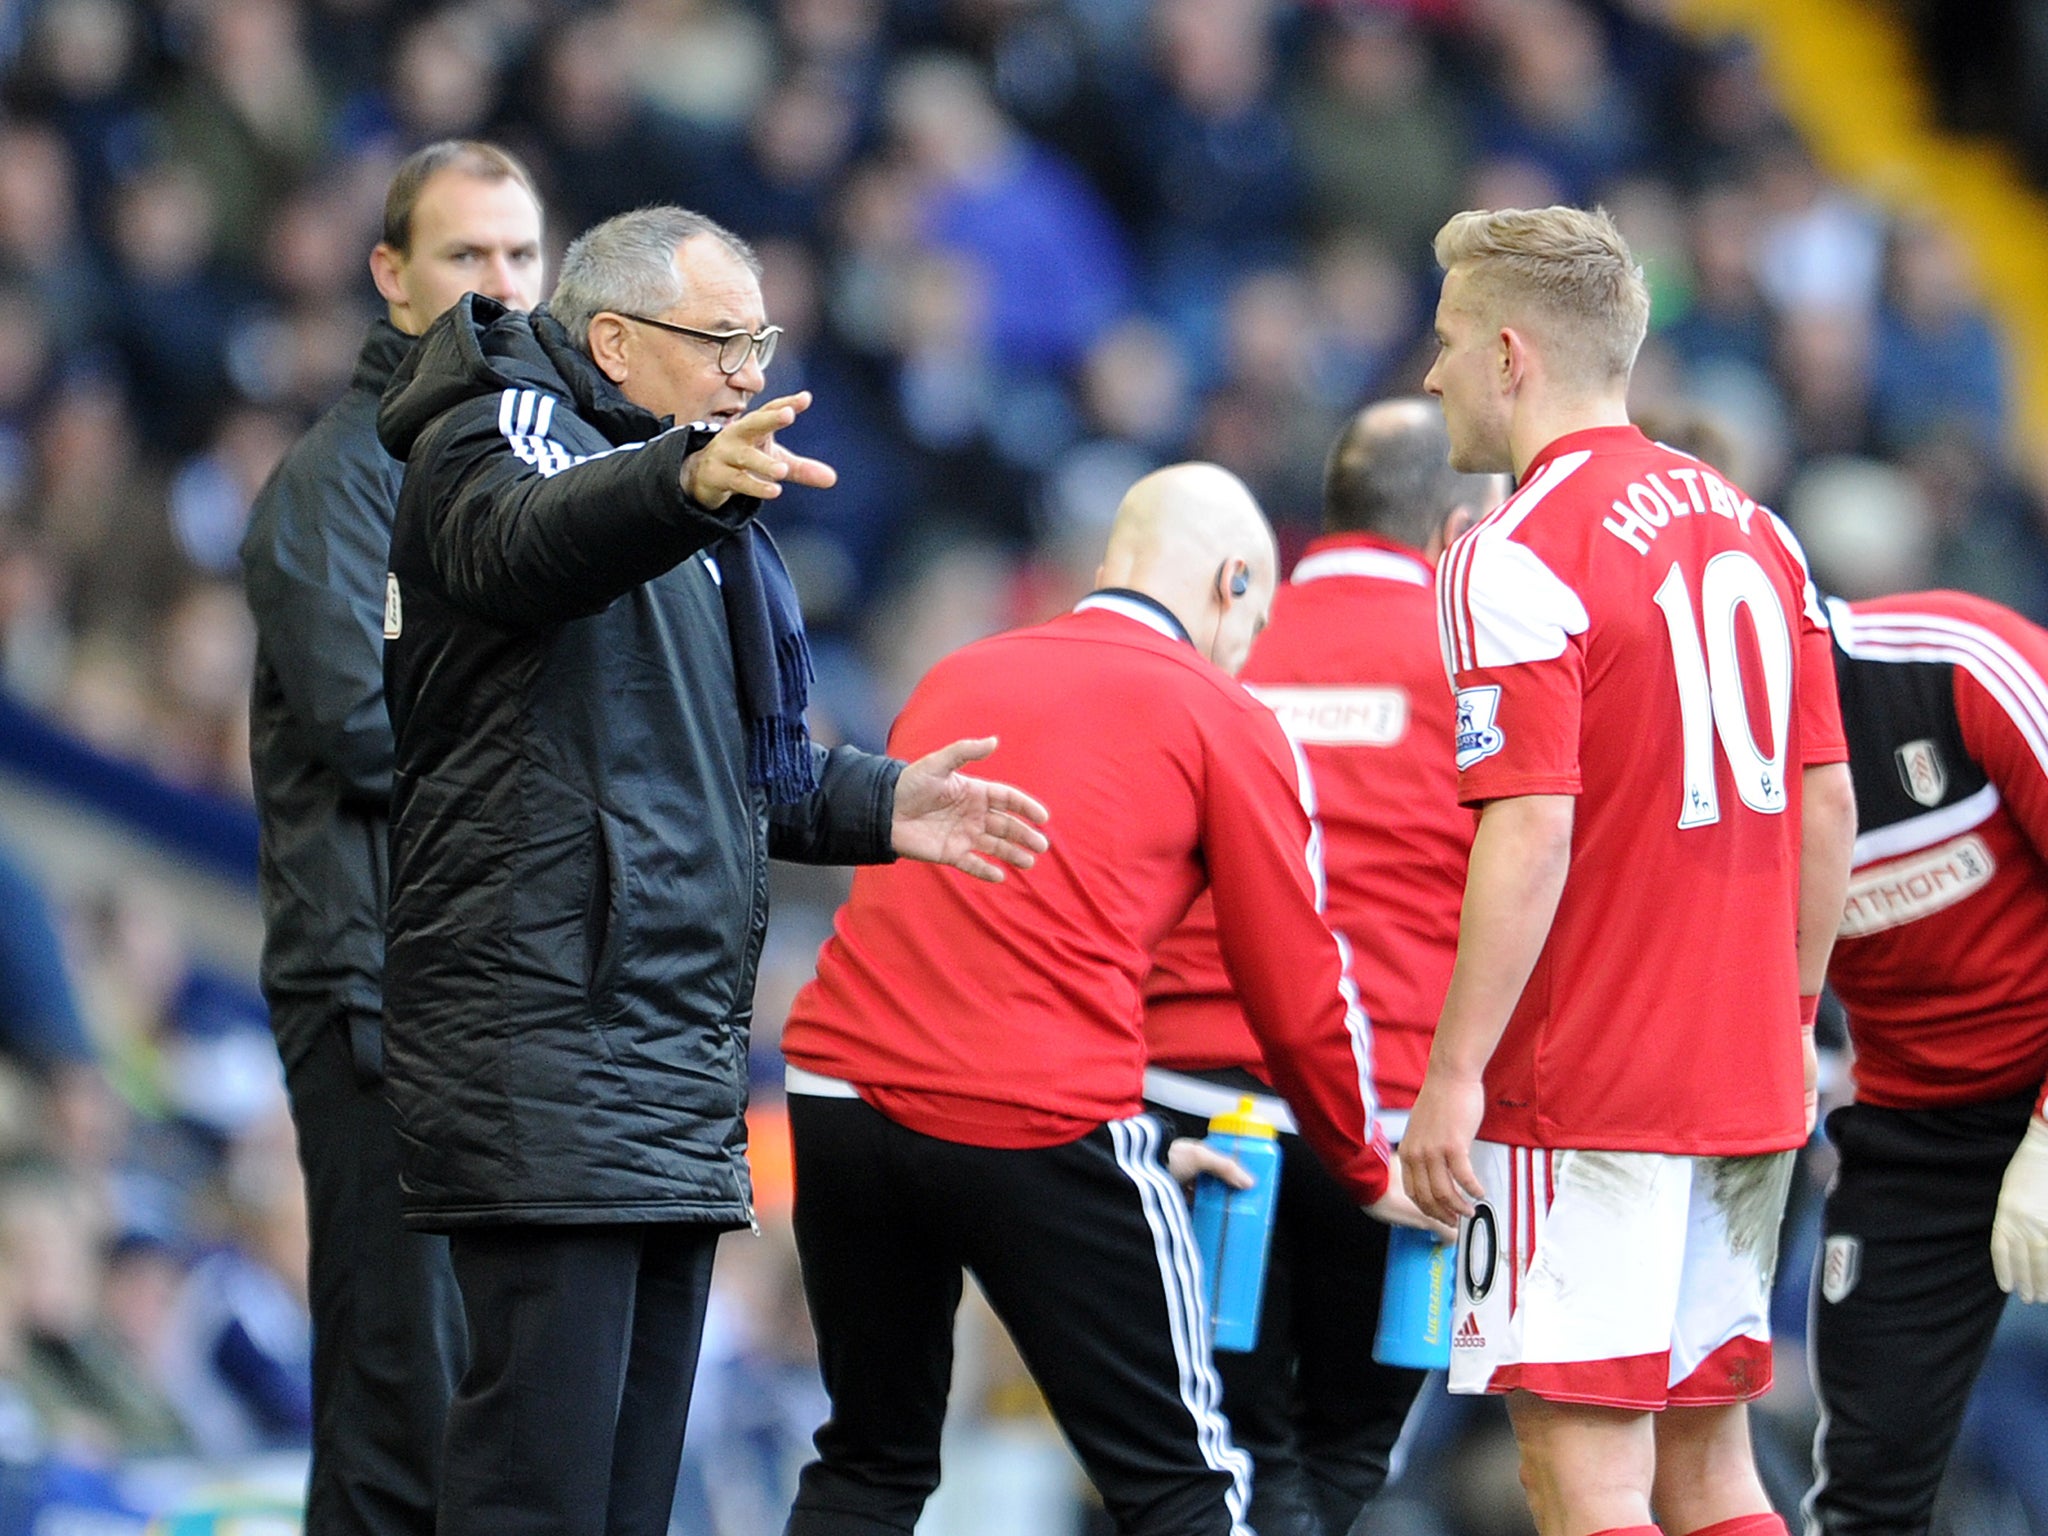 Fulham manager Felix Magath makes a gesture from the touchline